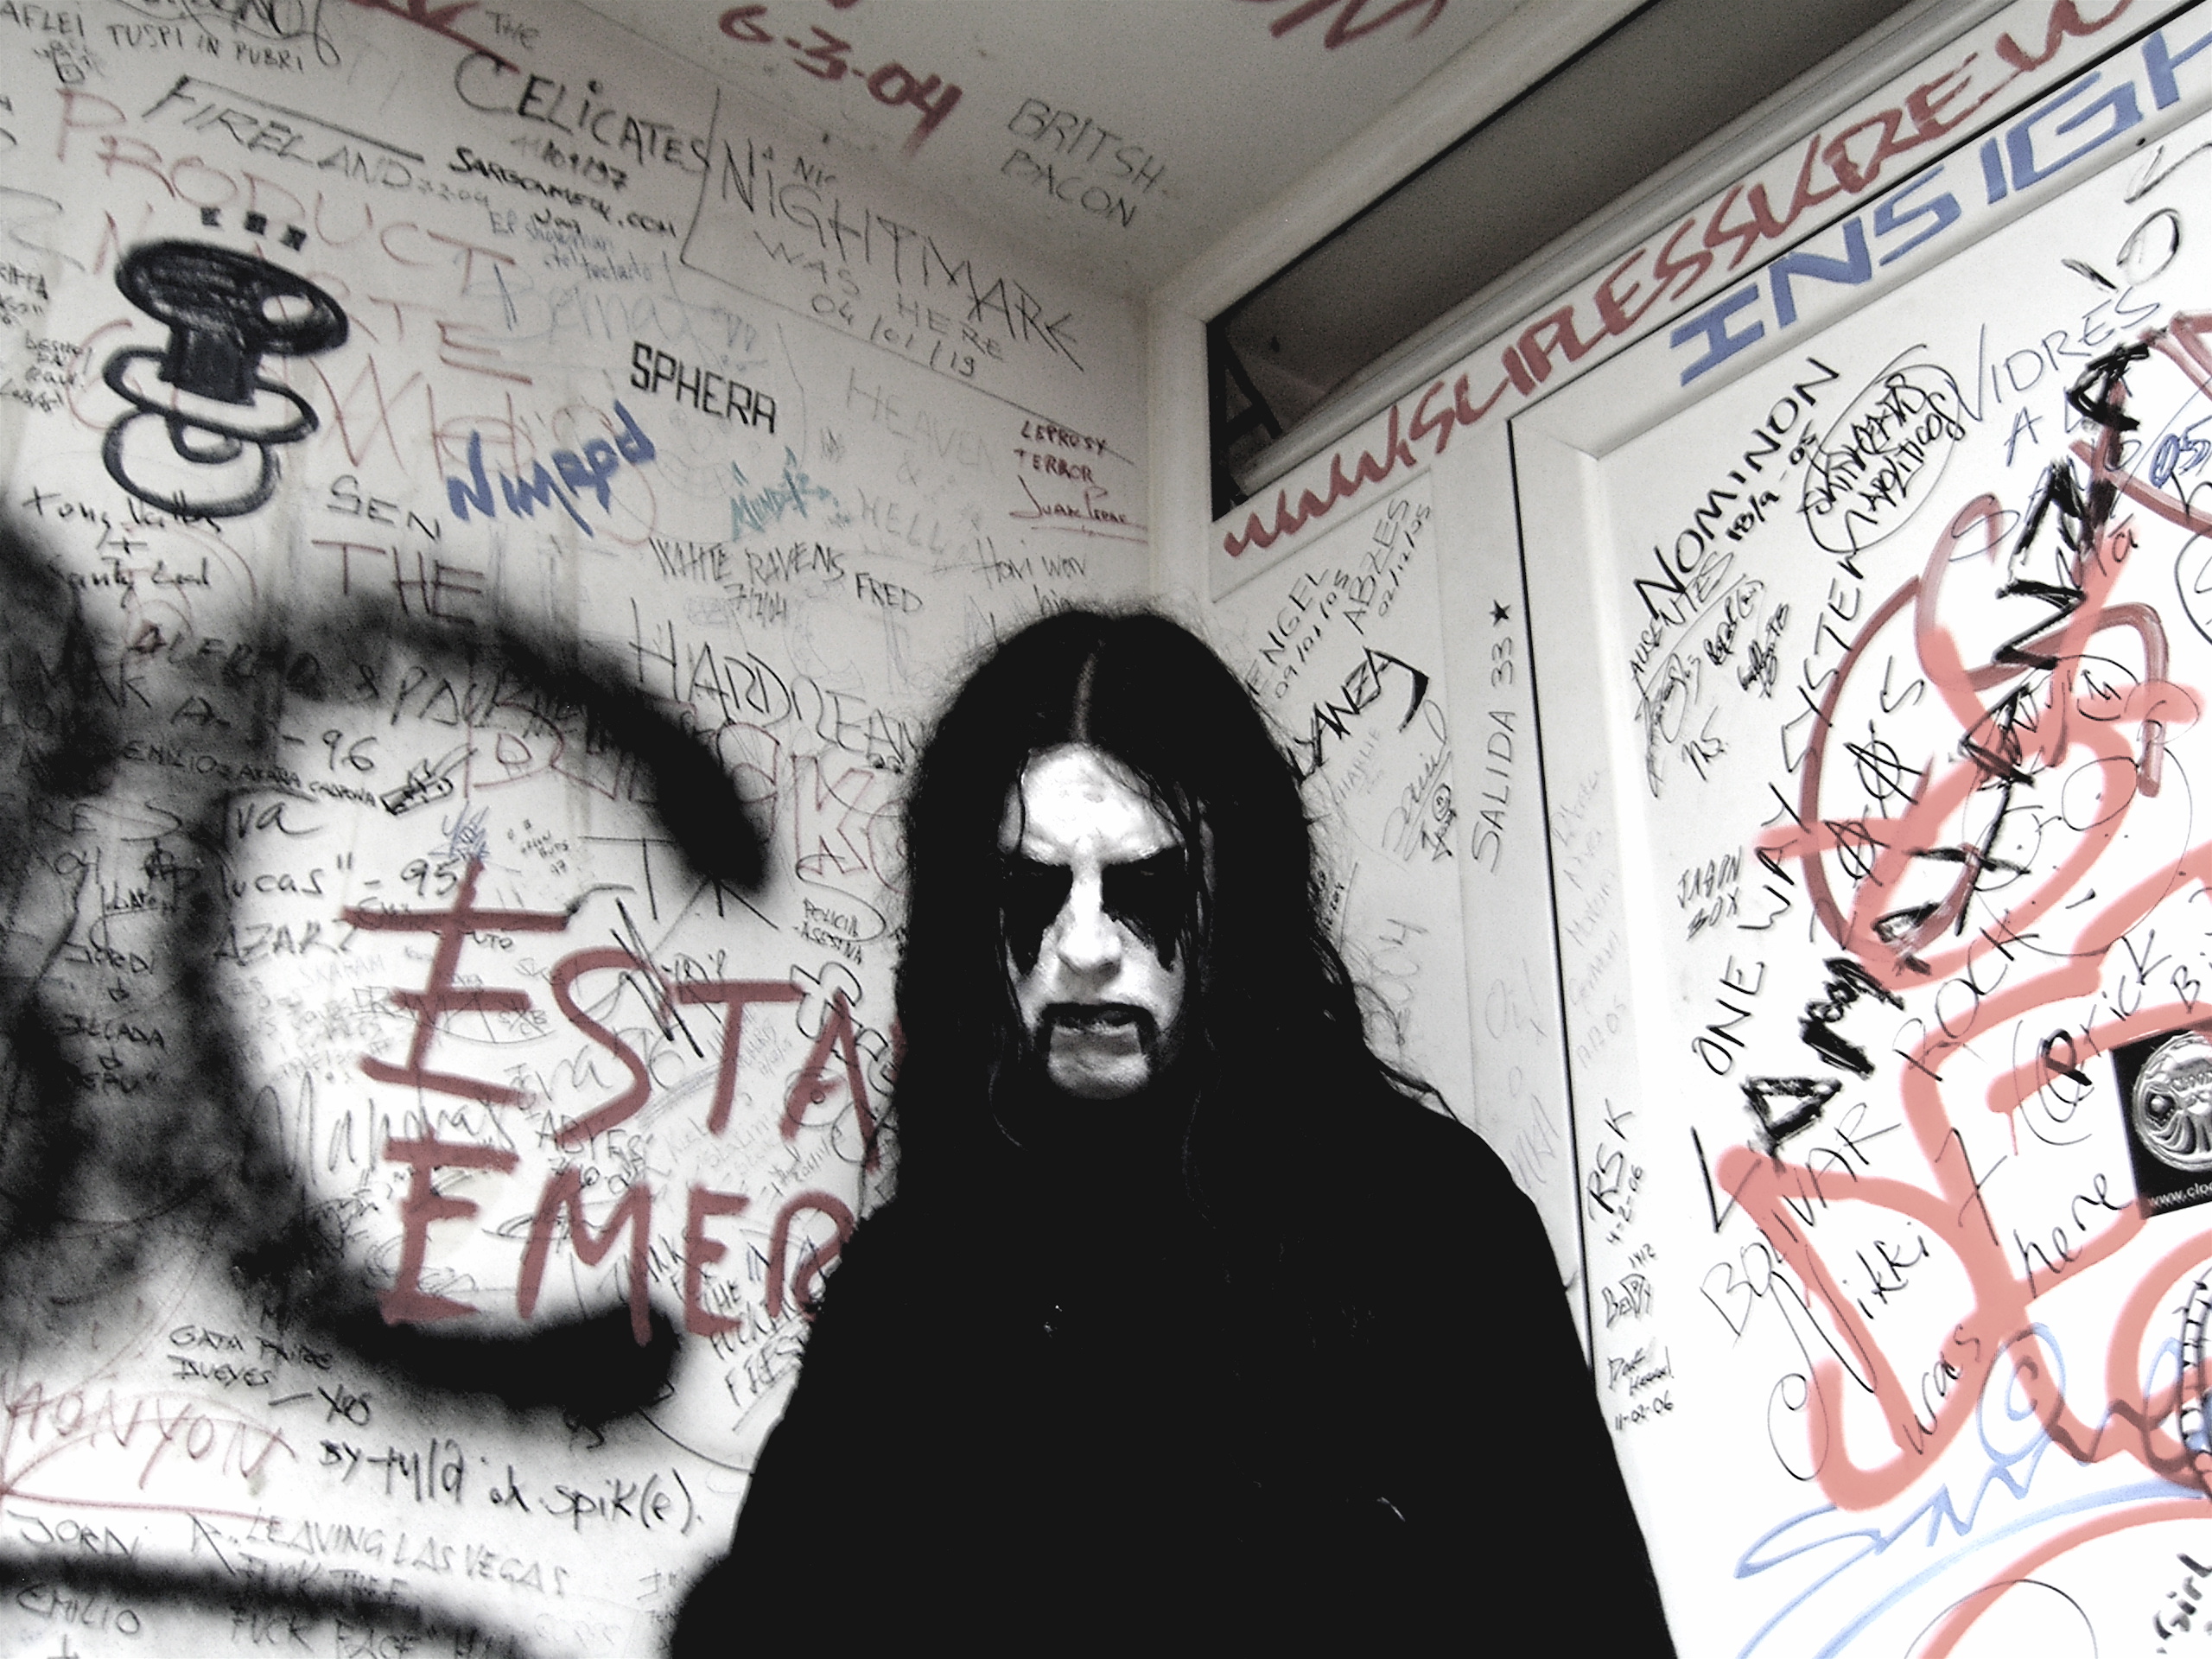 Portrait of Malefic/XASTHUR/Scott Connors backstage in Barcelona on SUNN O)))s 2006 tour of Europe